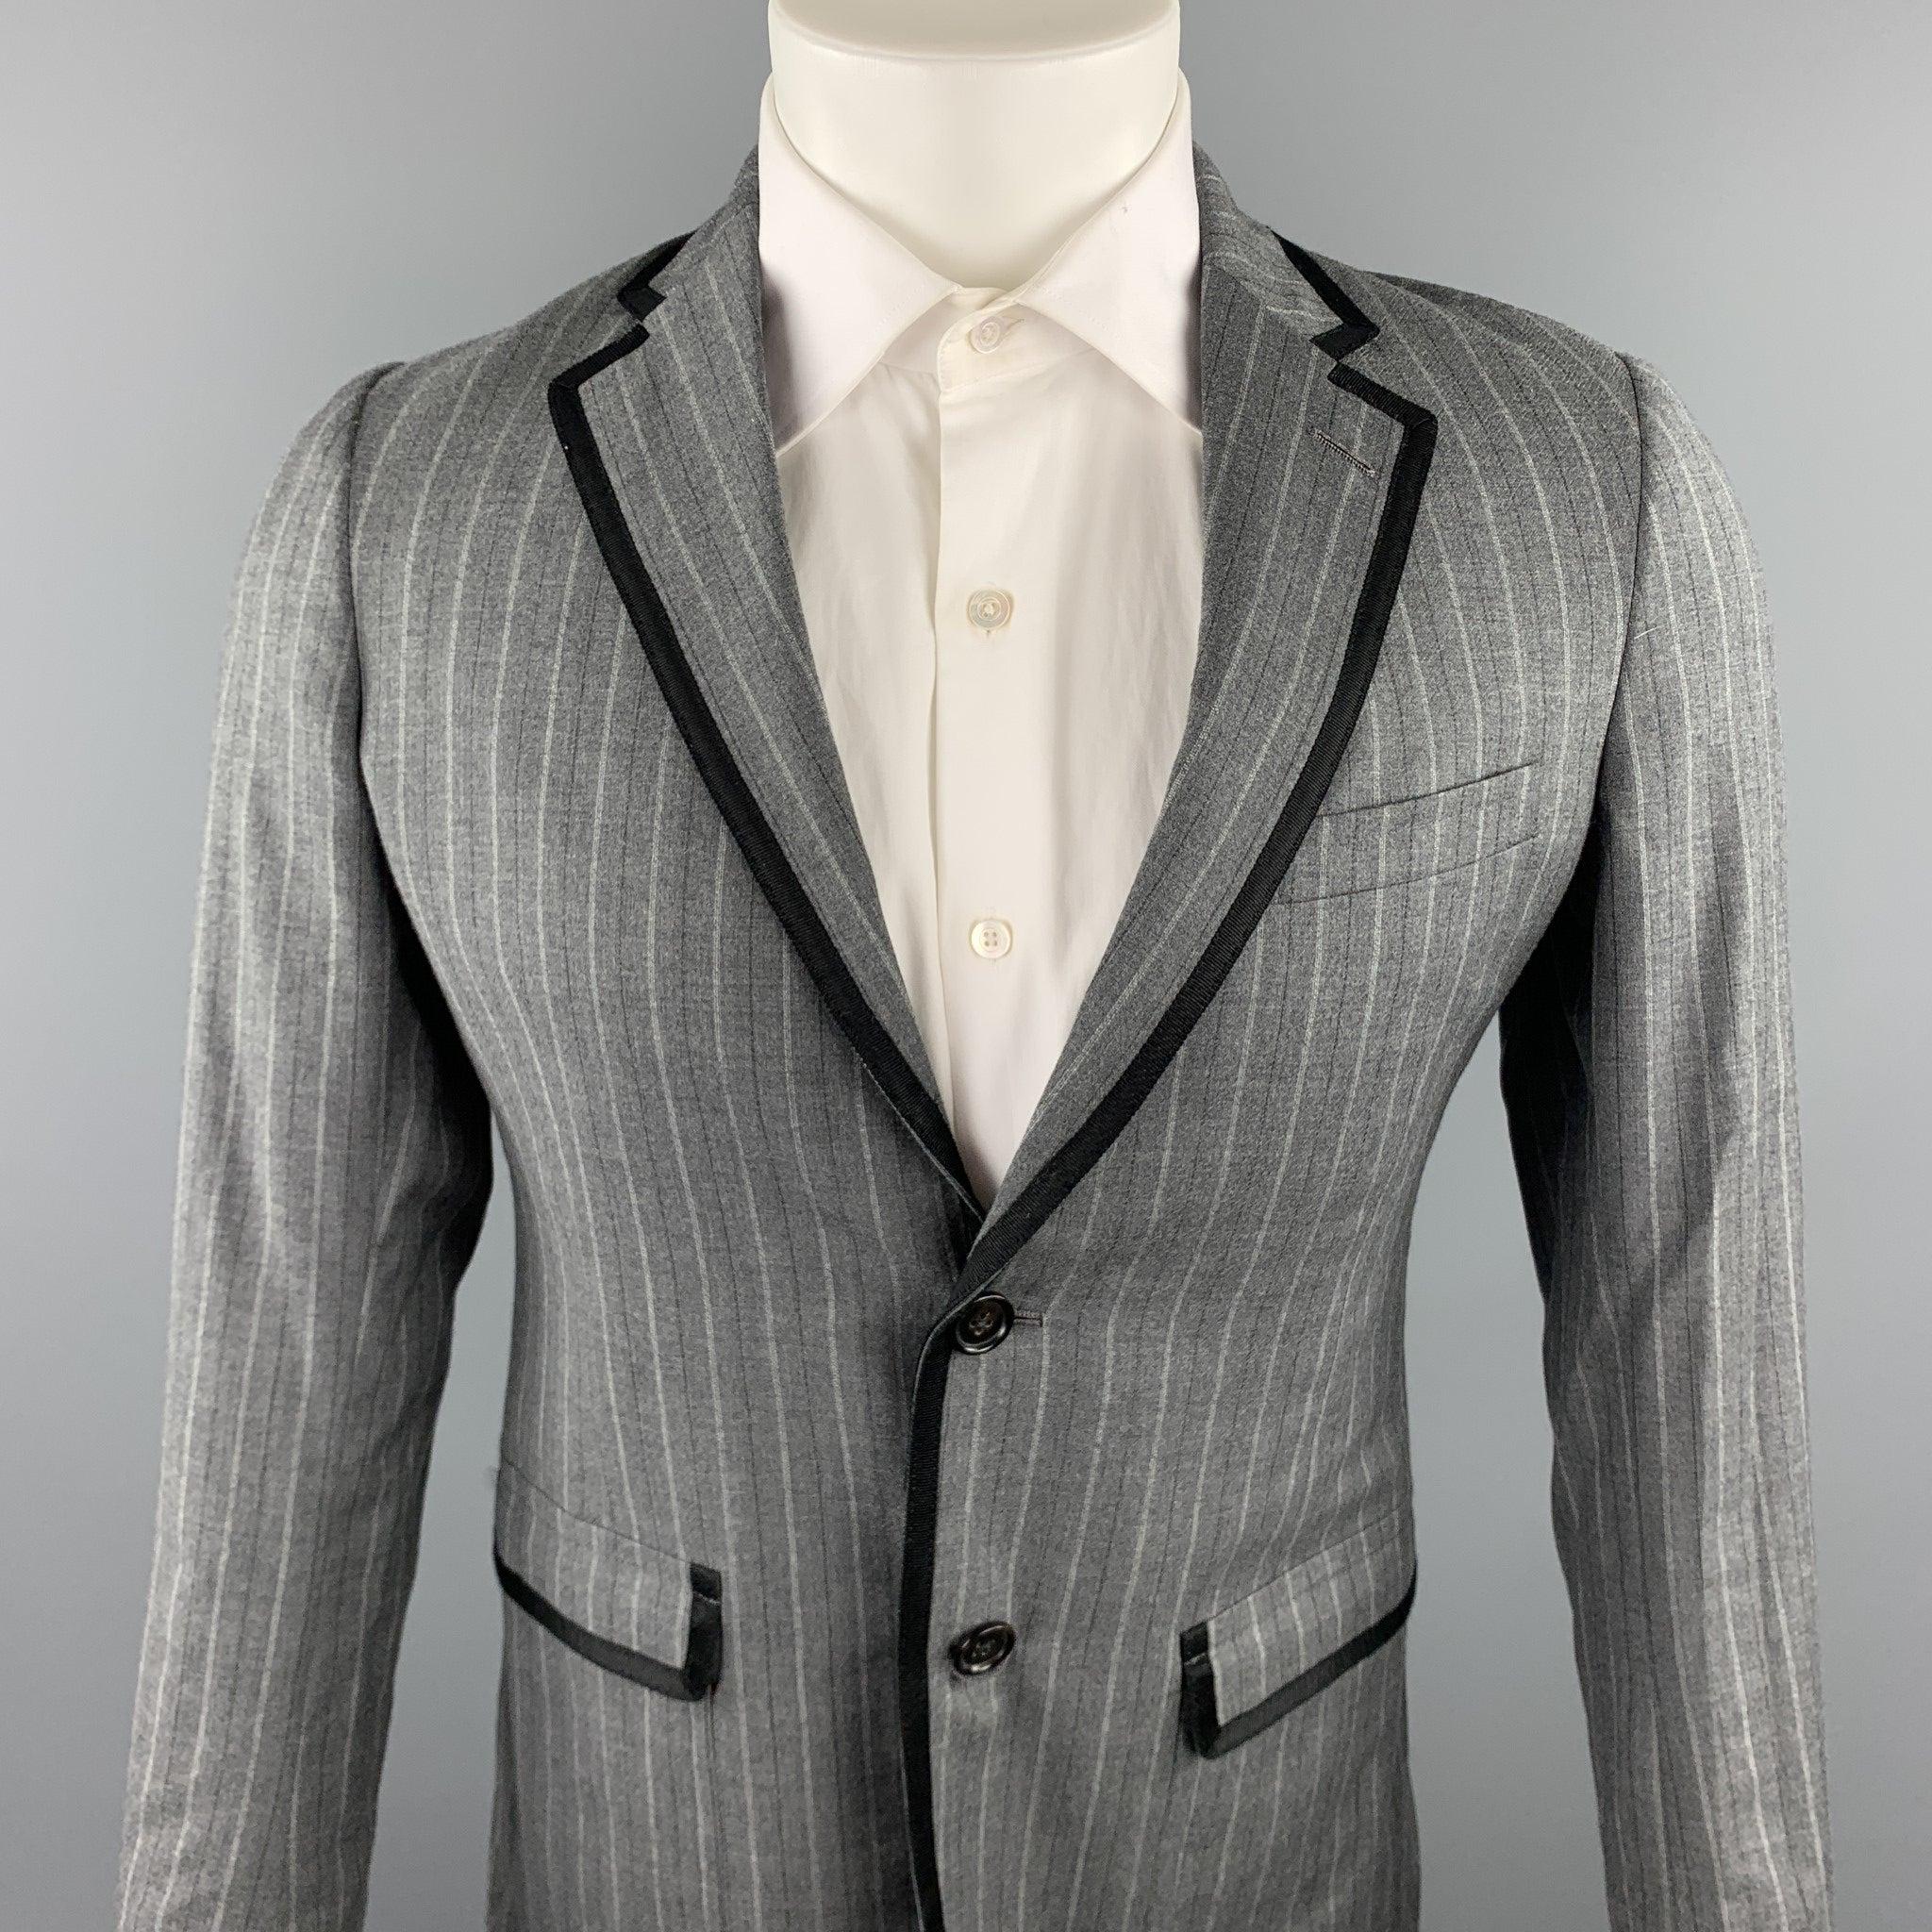 BAND OF OUTSIDERS sport coat comes in a grey stripe wool with a full liner featuring a notch lapel, black ribbon trim, flap pockets, and double button closure. Made in USA.Very Good
Pre-Owned Condition. 

Marked:   1 

Measurements: 
 
Shoulder: 16